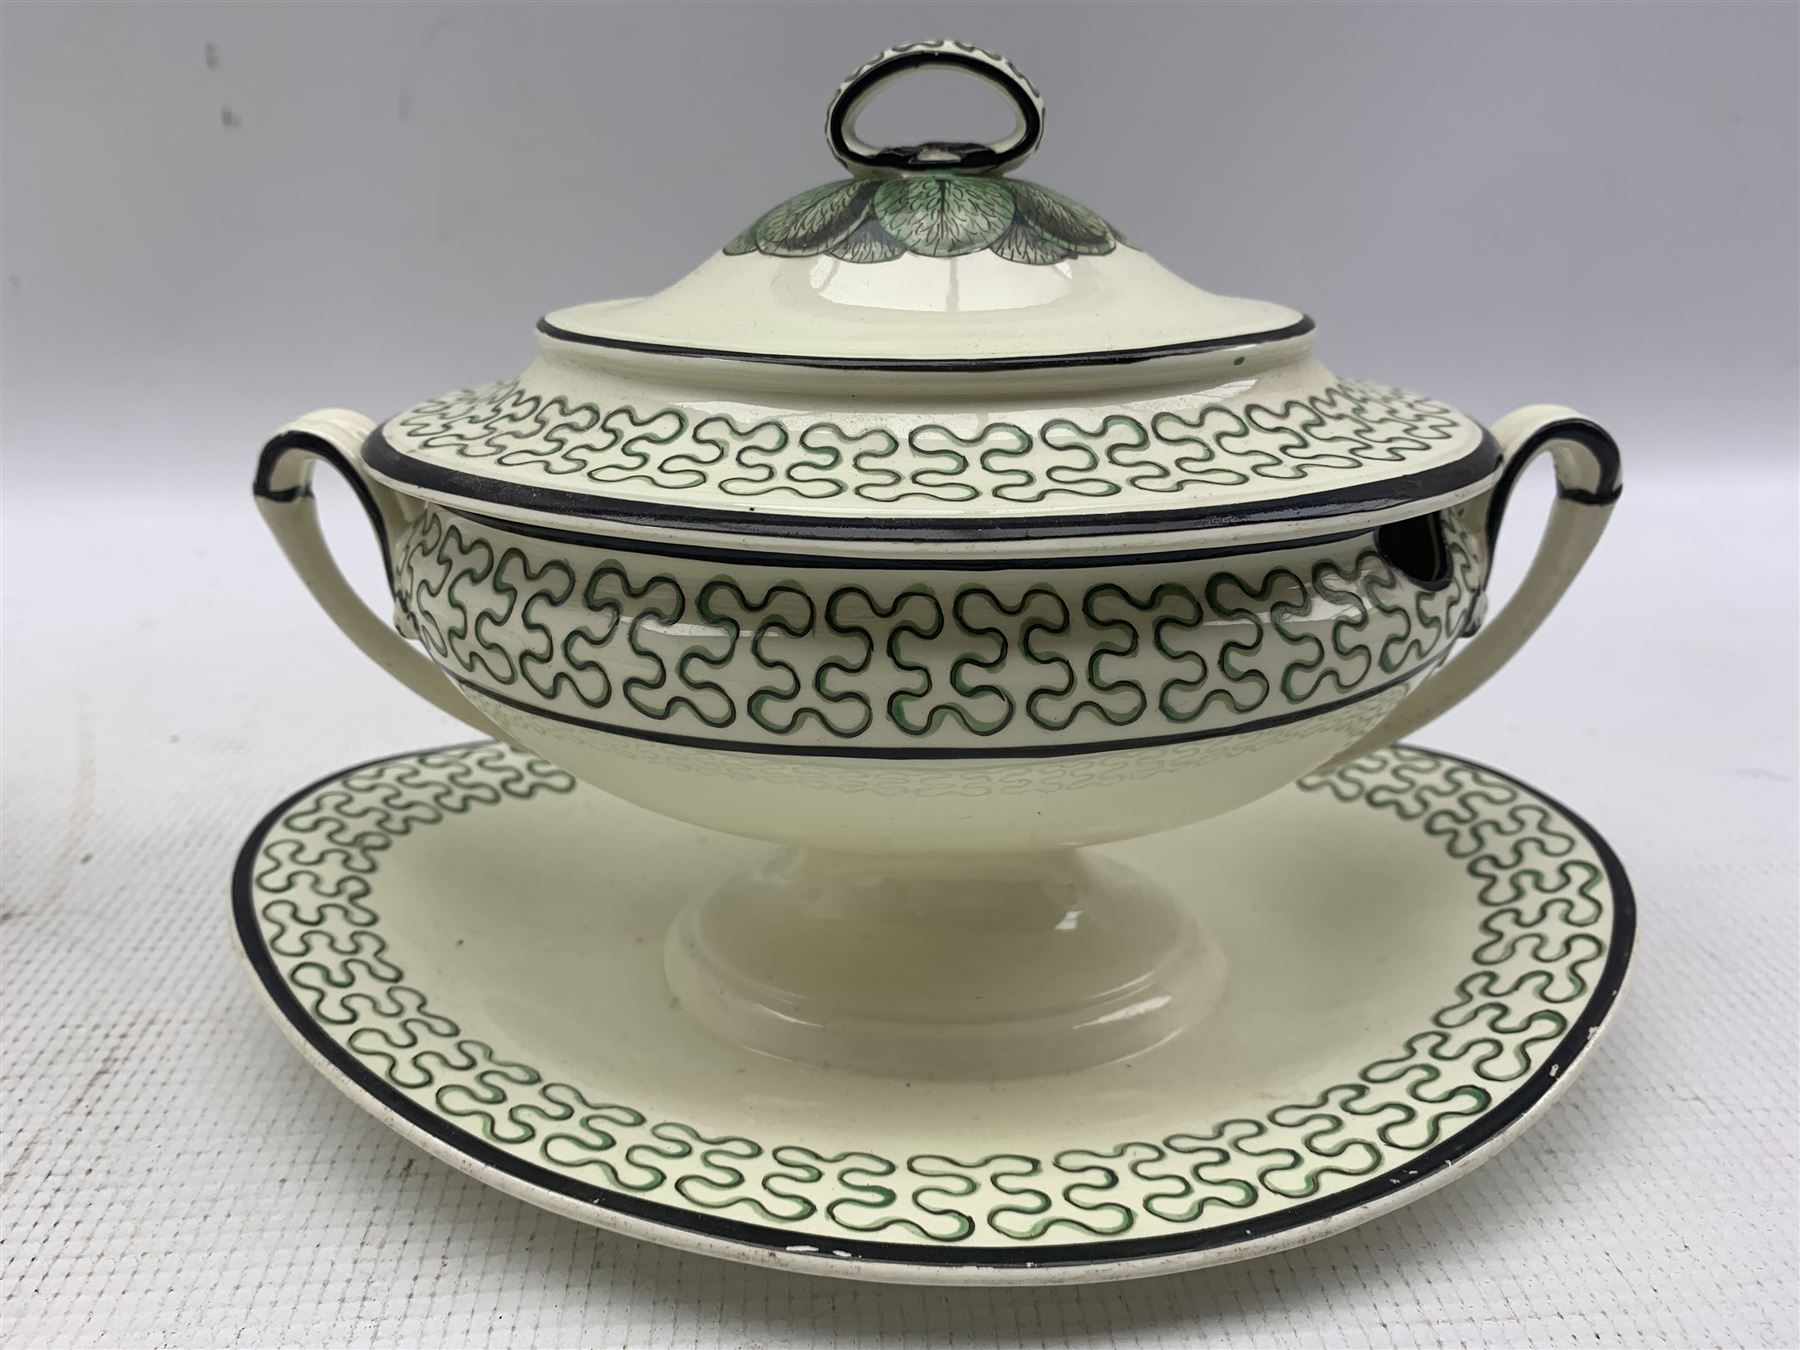 Pair of late 18th century Wedgwood Creamware sauce tureens and oval dish c1790 - Image 3 of 4